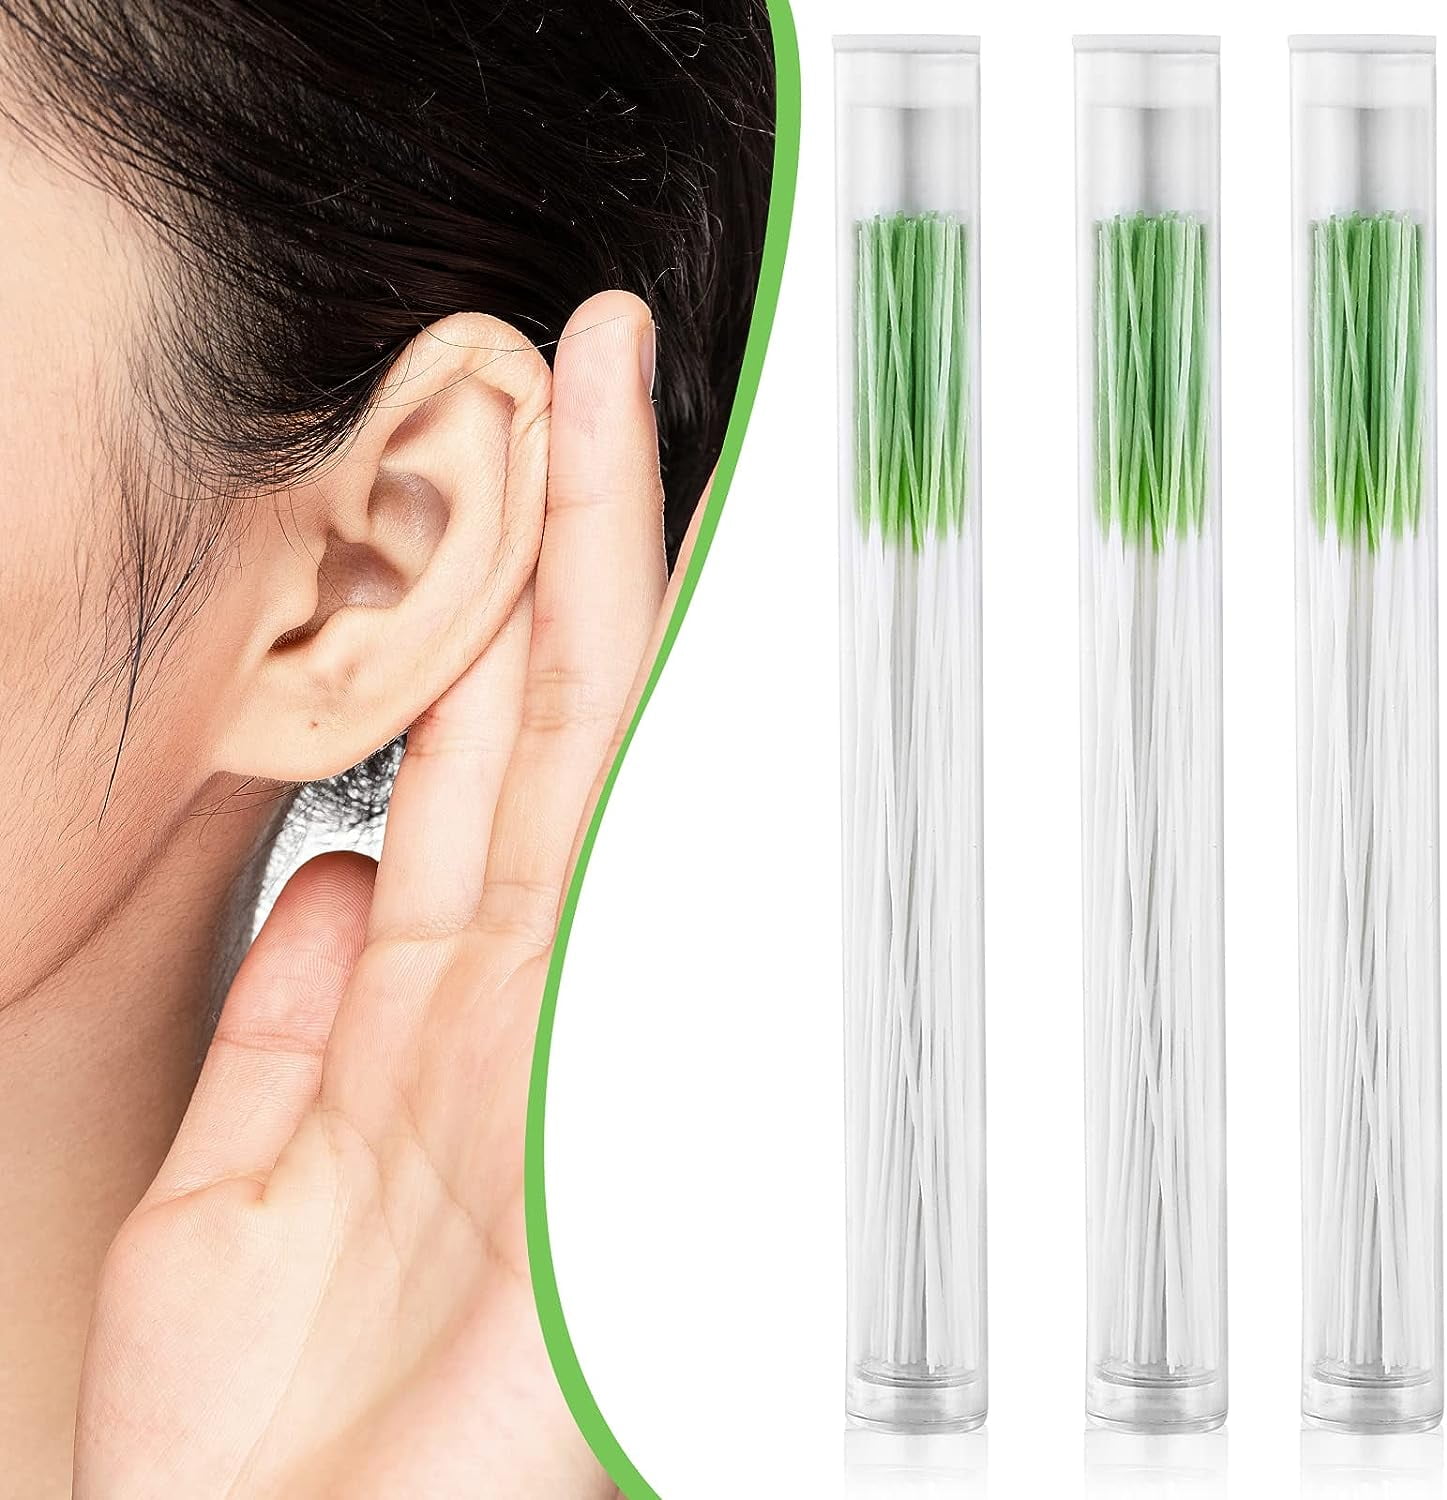 Travelwant 20ml/Set Ear Hole Floss Earrings Hole Cleaner Disposable Piercing Aftercare Cleaner Earrings Piercing Cleaning Line Ear Piercing Care